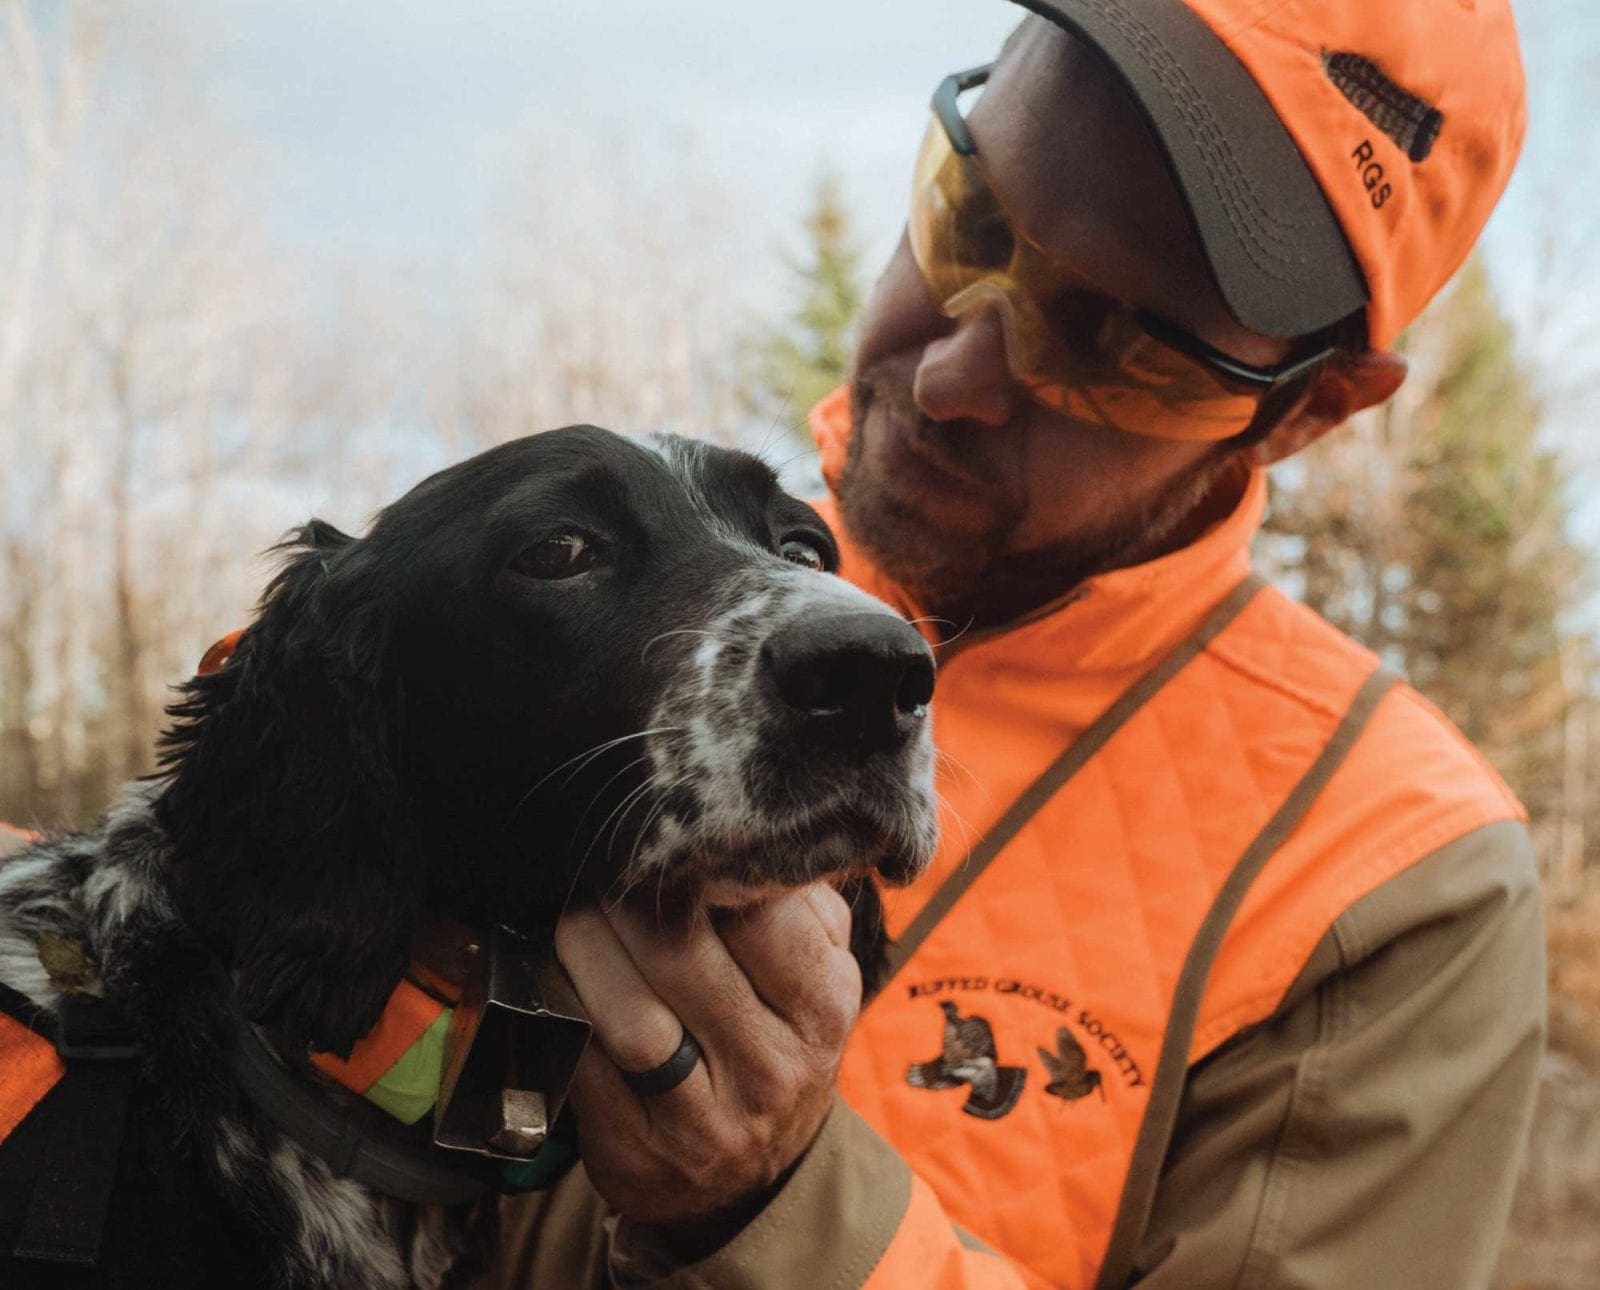 Dr. Ben Jones of the Ruffed Grouse Society with an English setter